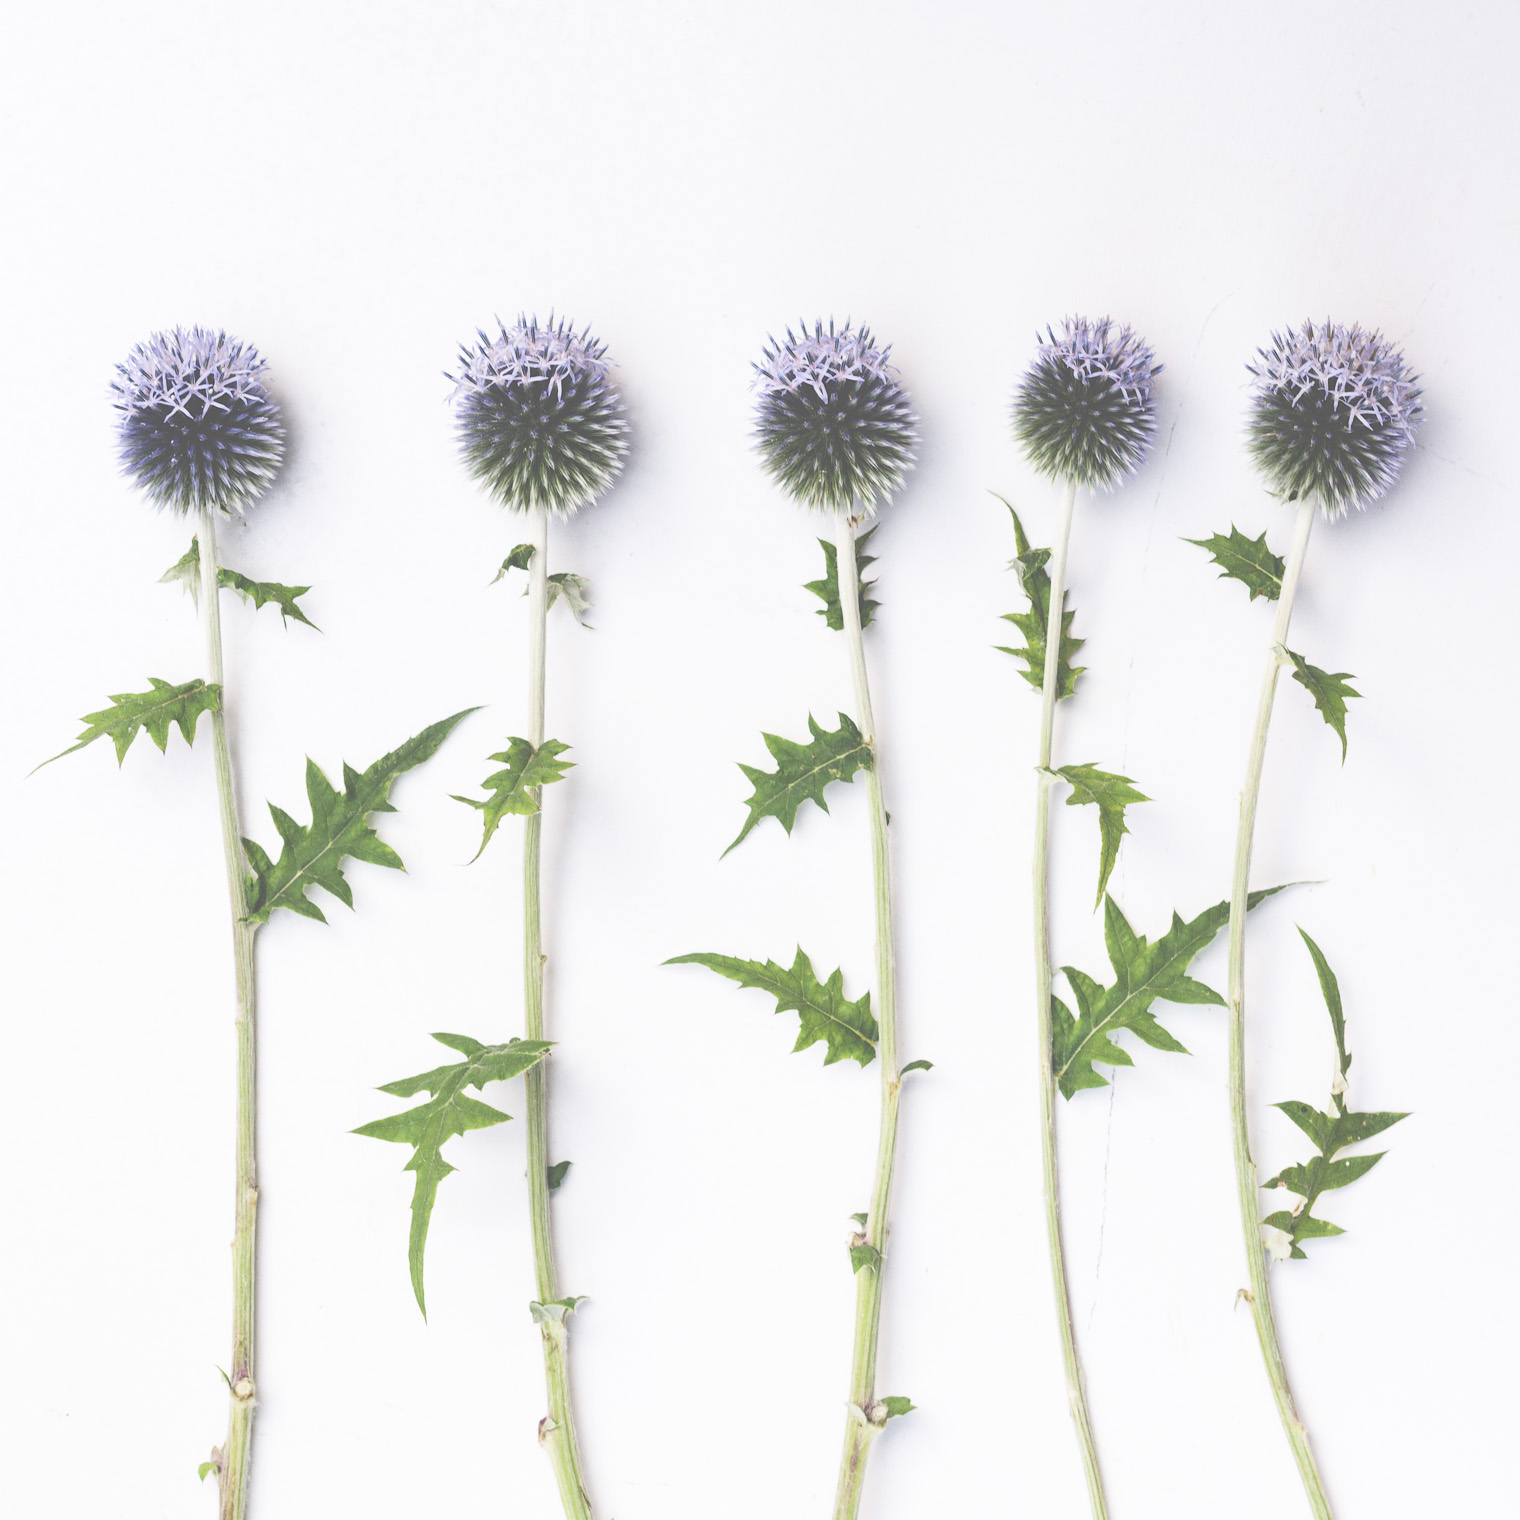 Sunday Sundries, Keeping With the Times, Echinops, Globe Thistle